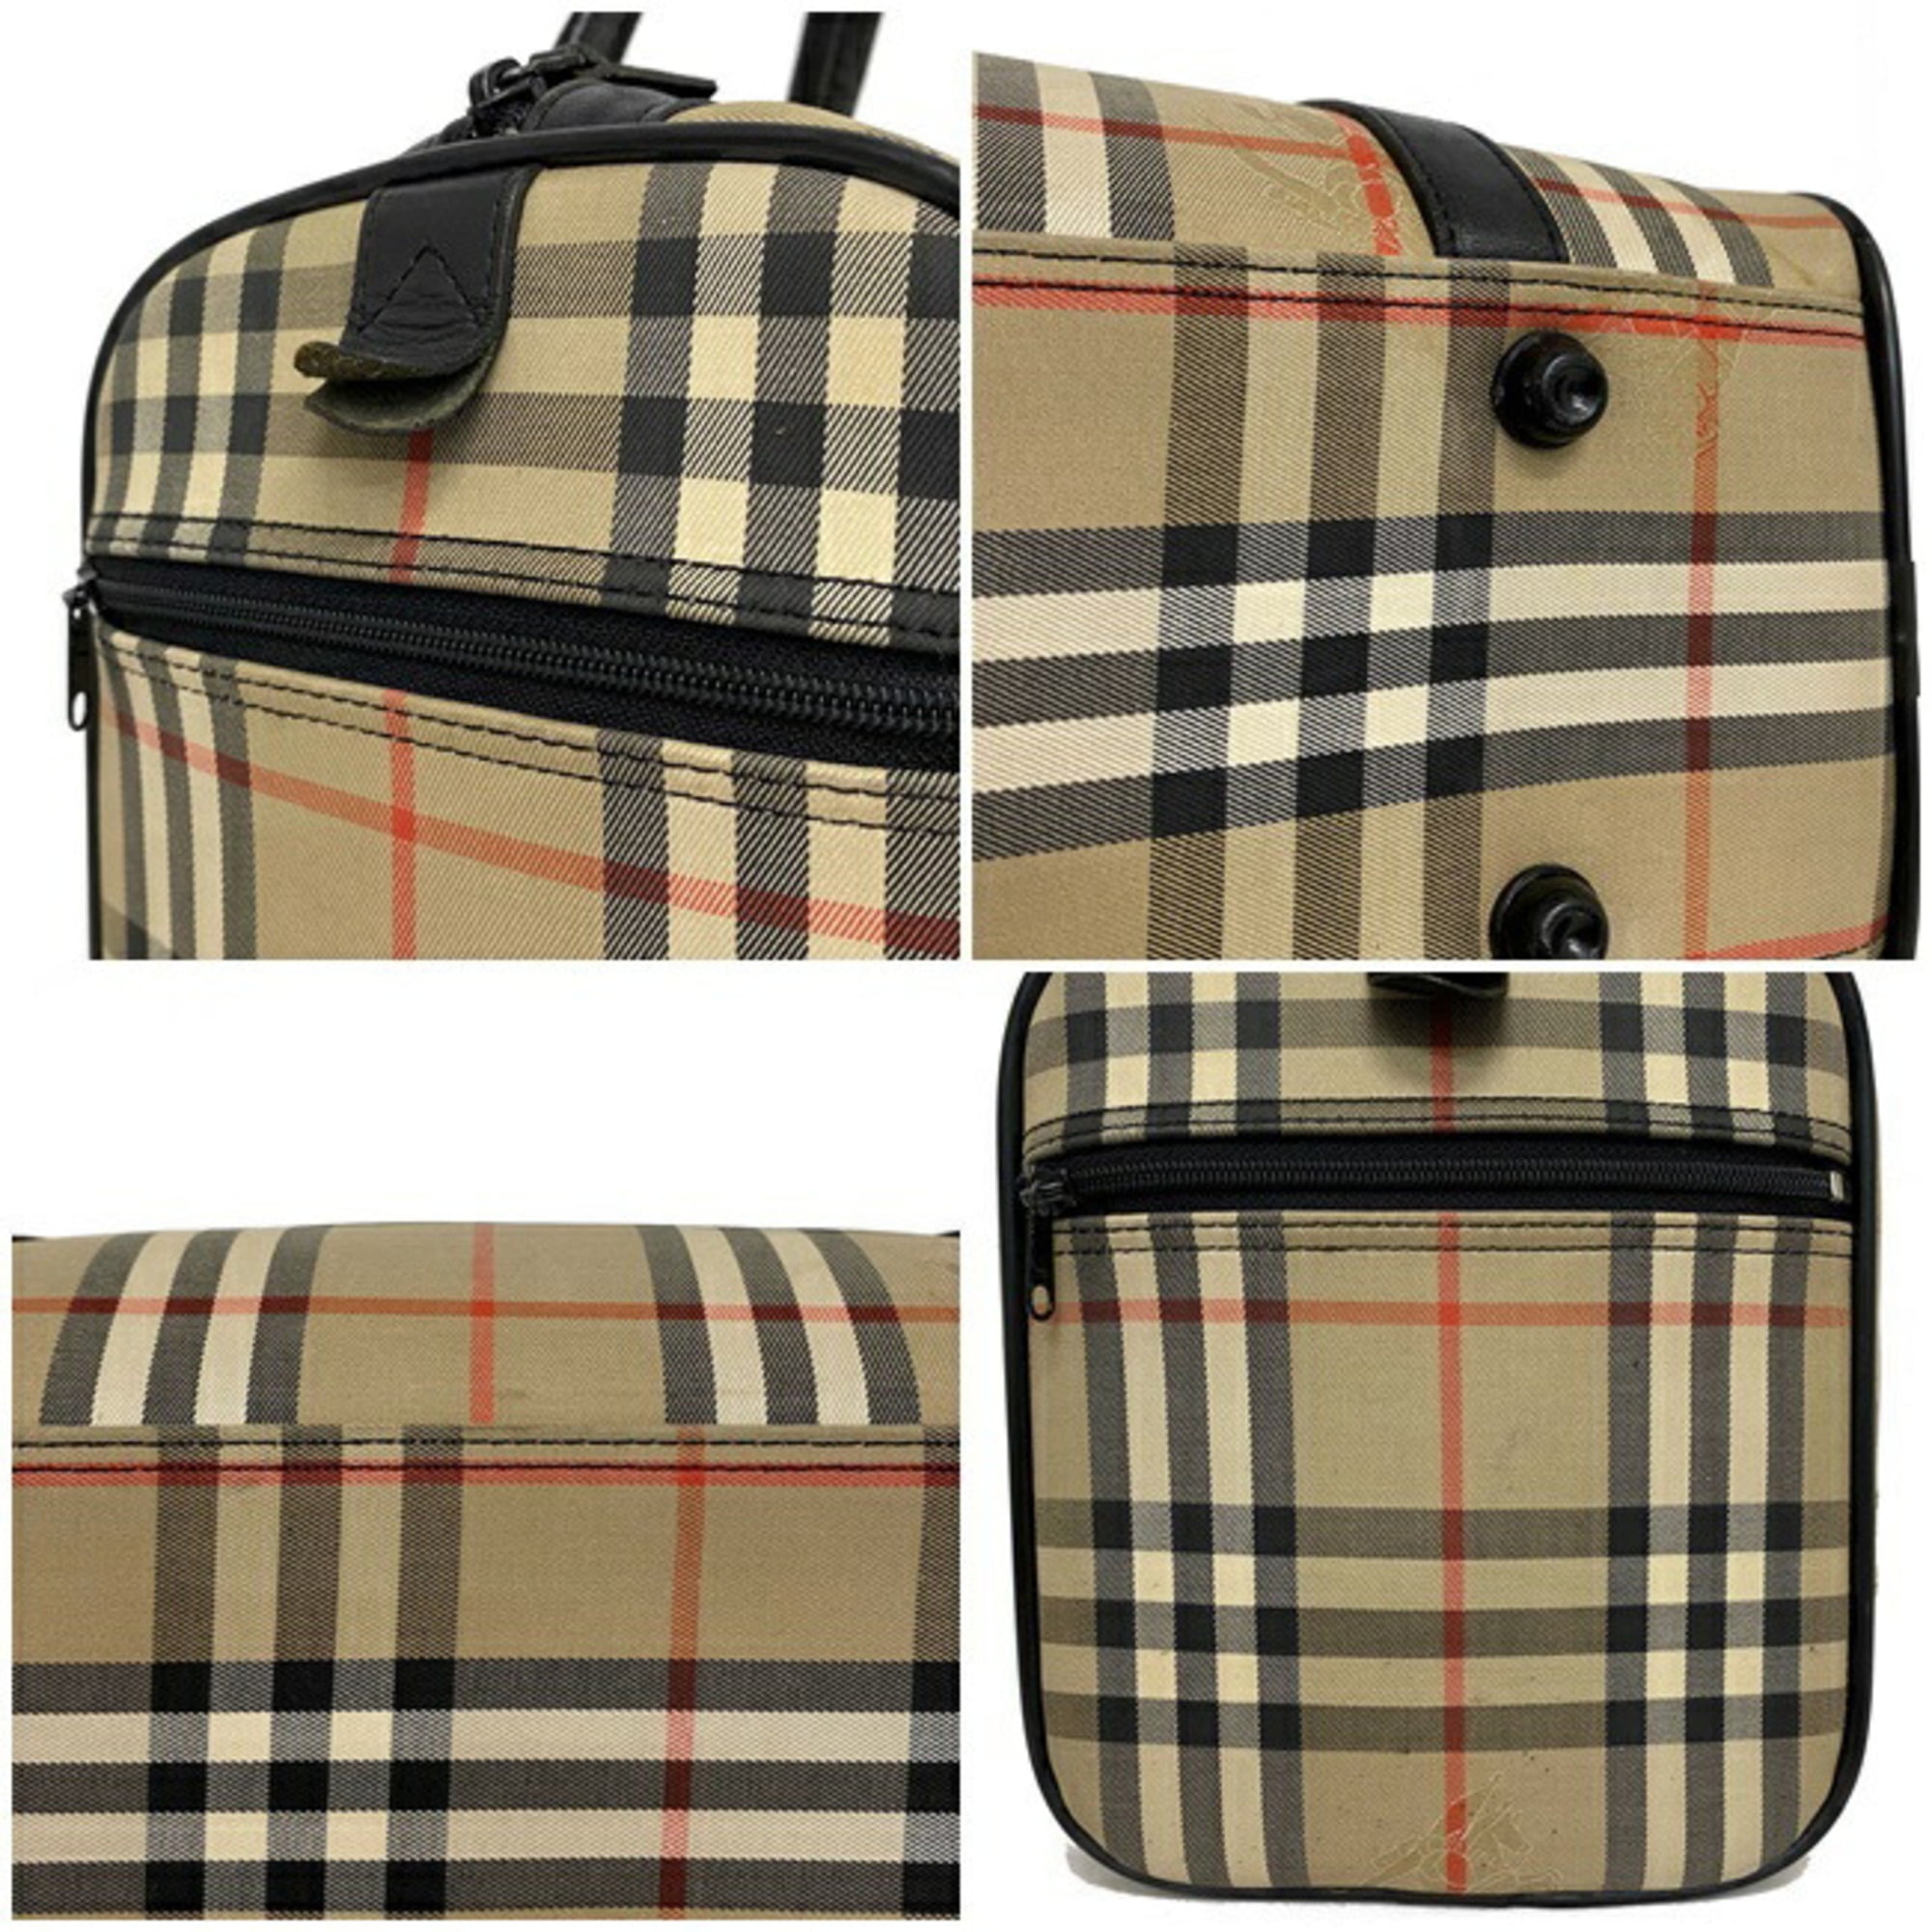 Authenticated Used Burberry Boston Bag Beige Black Check Canvas Leather  BURBERRY Mini Business Trip Women's Men's 